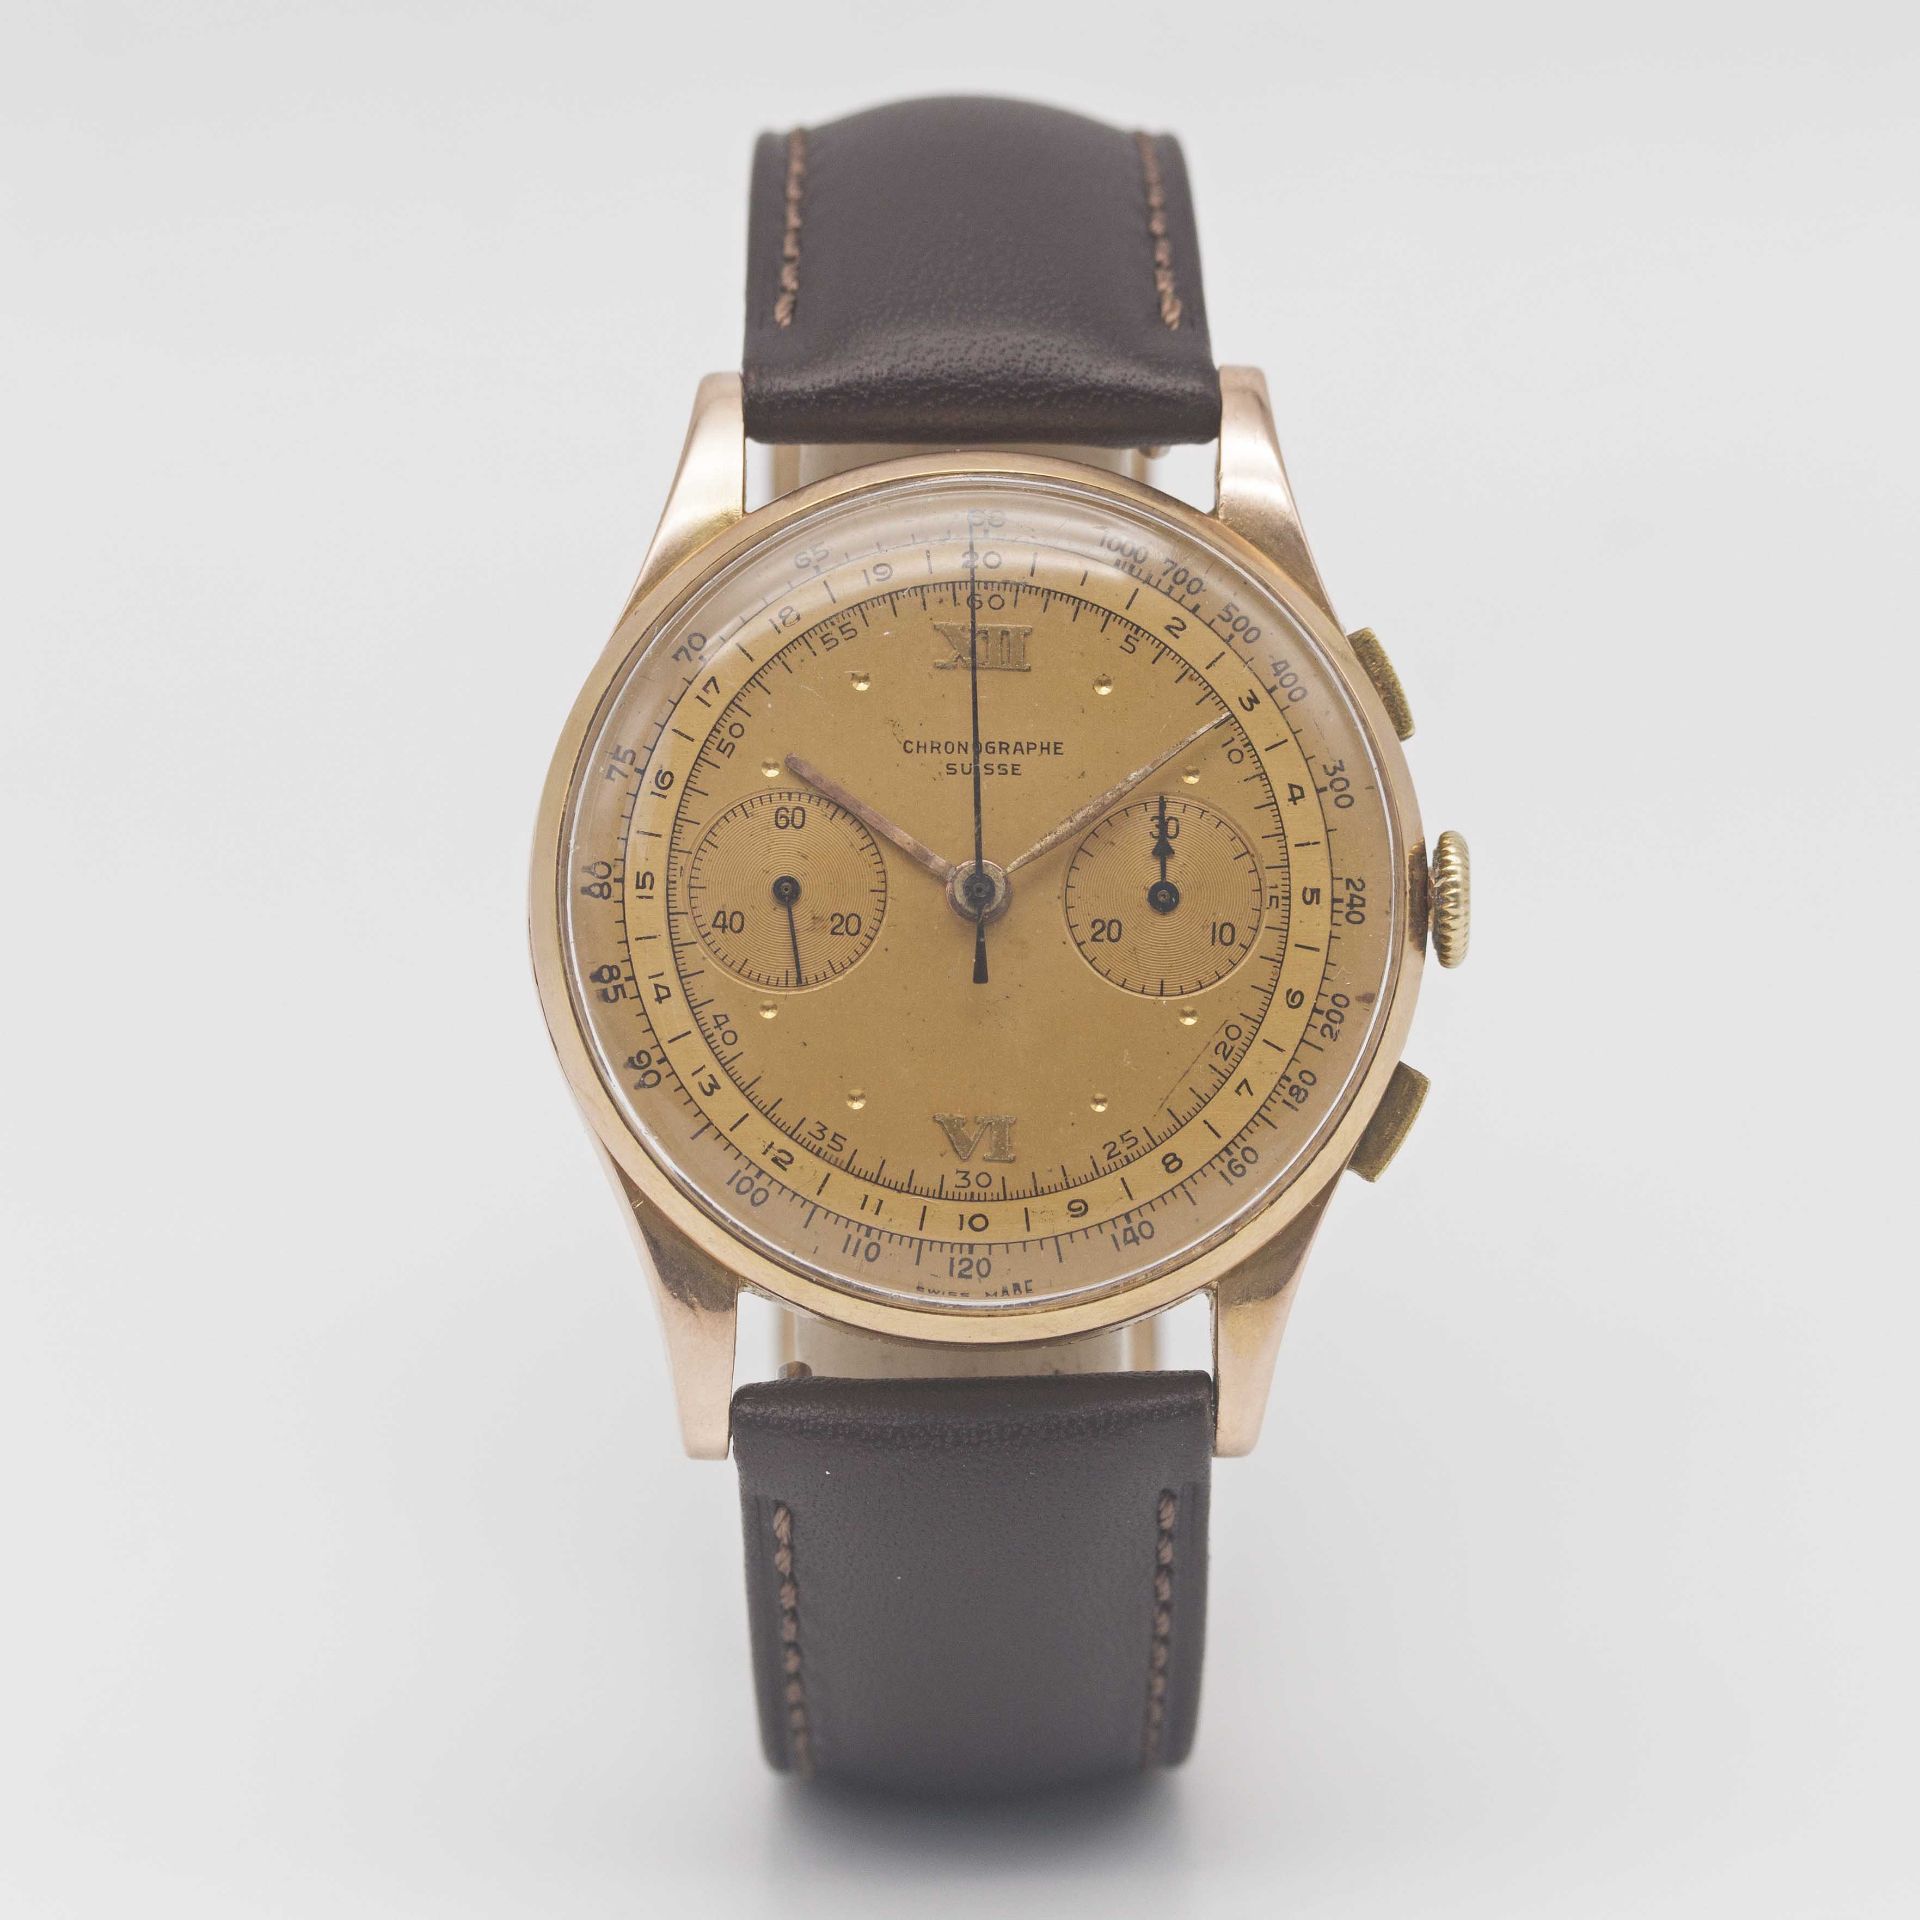 A GENTLEMAN'S 18K SOLID ROSE GOLD CHRONOGRAPHE SUISSE WRIST WATCH CIRCA 1940s Movement: Manual wind. - Image 2 of 9